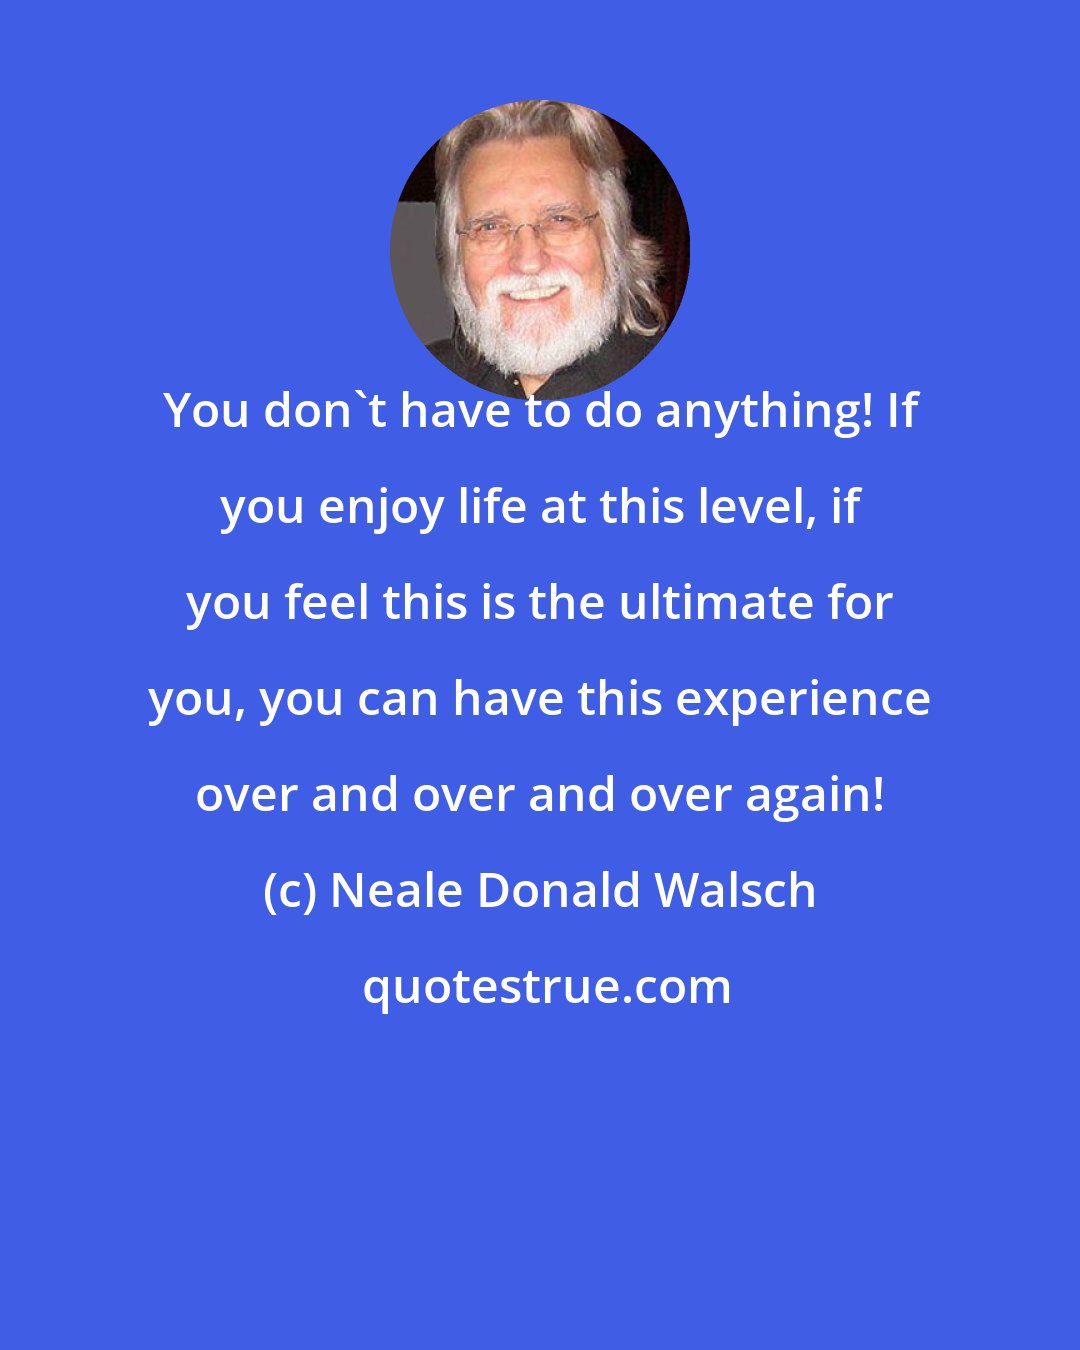 Neale Donald Walsch: You don't have to do anything! If you enjoy life at this level, if you feel this is the ultimate for you, you can have this experience over and over and over again!